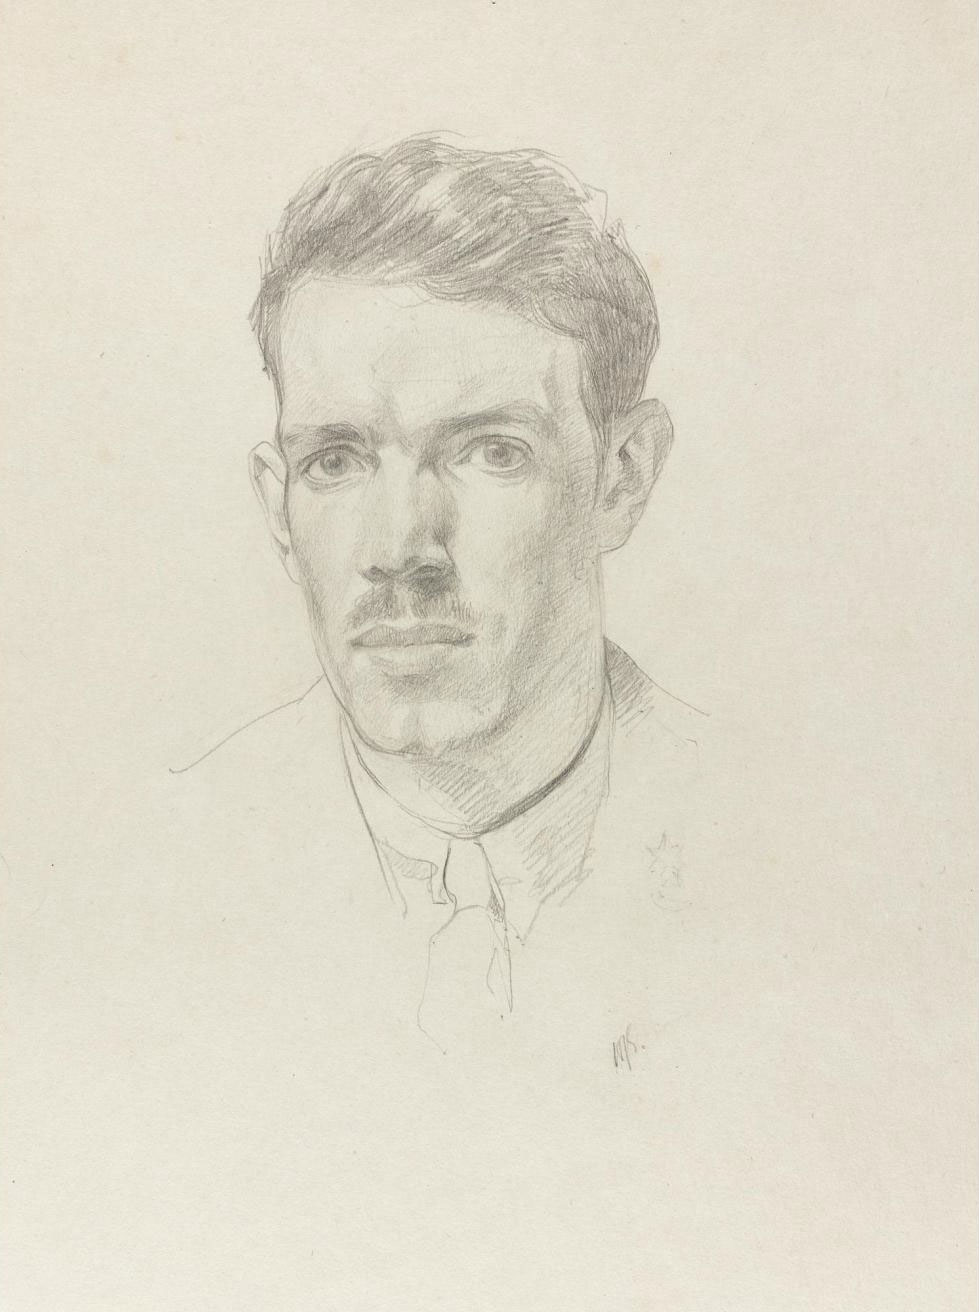 Self-portrait drawn in pencil in northern France, 1918.